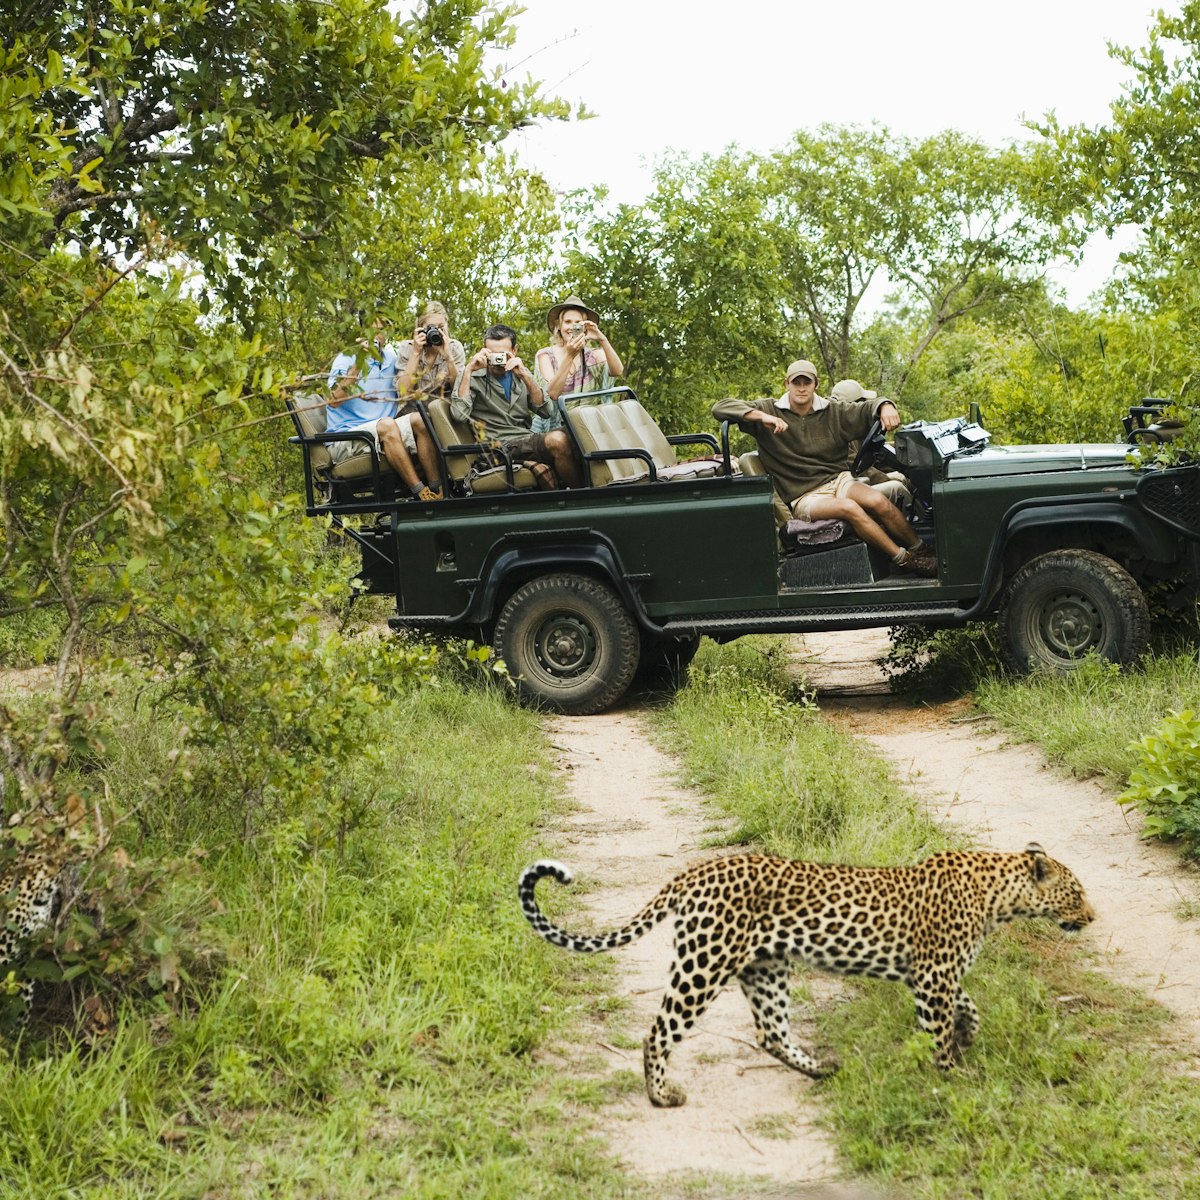 Leopard (Panthera pardus) crossing road with tourists in jeep in background
20s, 30s, 40s, adult, adventure, africa, animal, block, camera, casual, caucasian, crossing, excitement, full length, green, group, horizontal, jeep, kruger, leisure, leopard, men, national, nature, offroad, outdoors, panthera, pardus, park, people, photography, recreation, reserve, road, safari, singita, sitting, south africa, spots, tourism, tourist, track, transportation, trees, vacation, vehicle, watching, wildlife, women, young